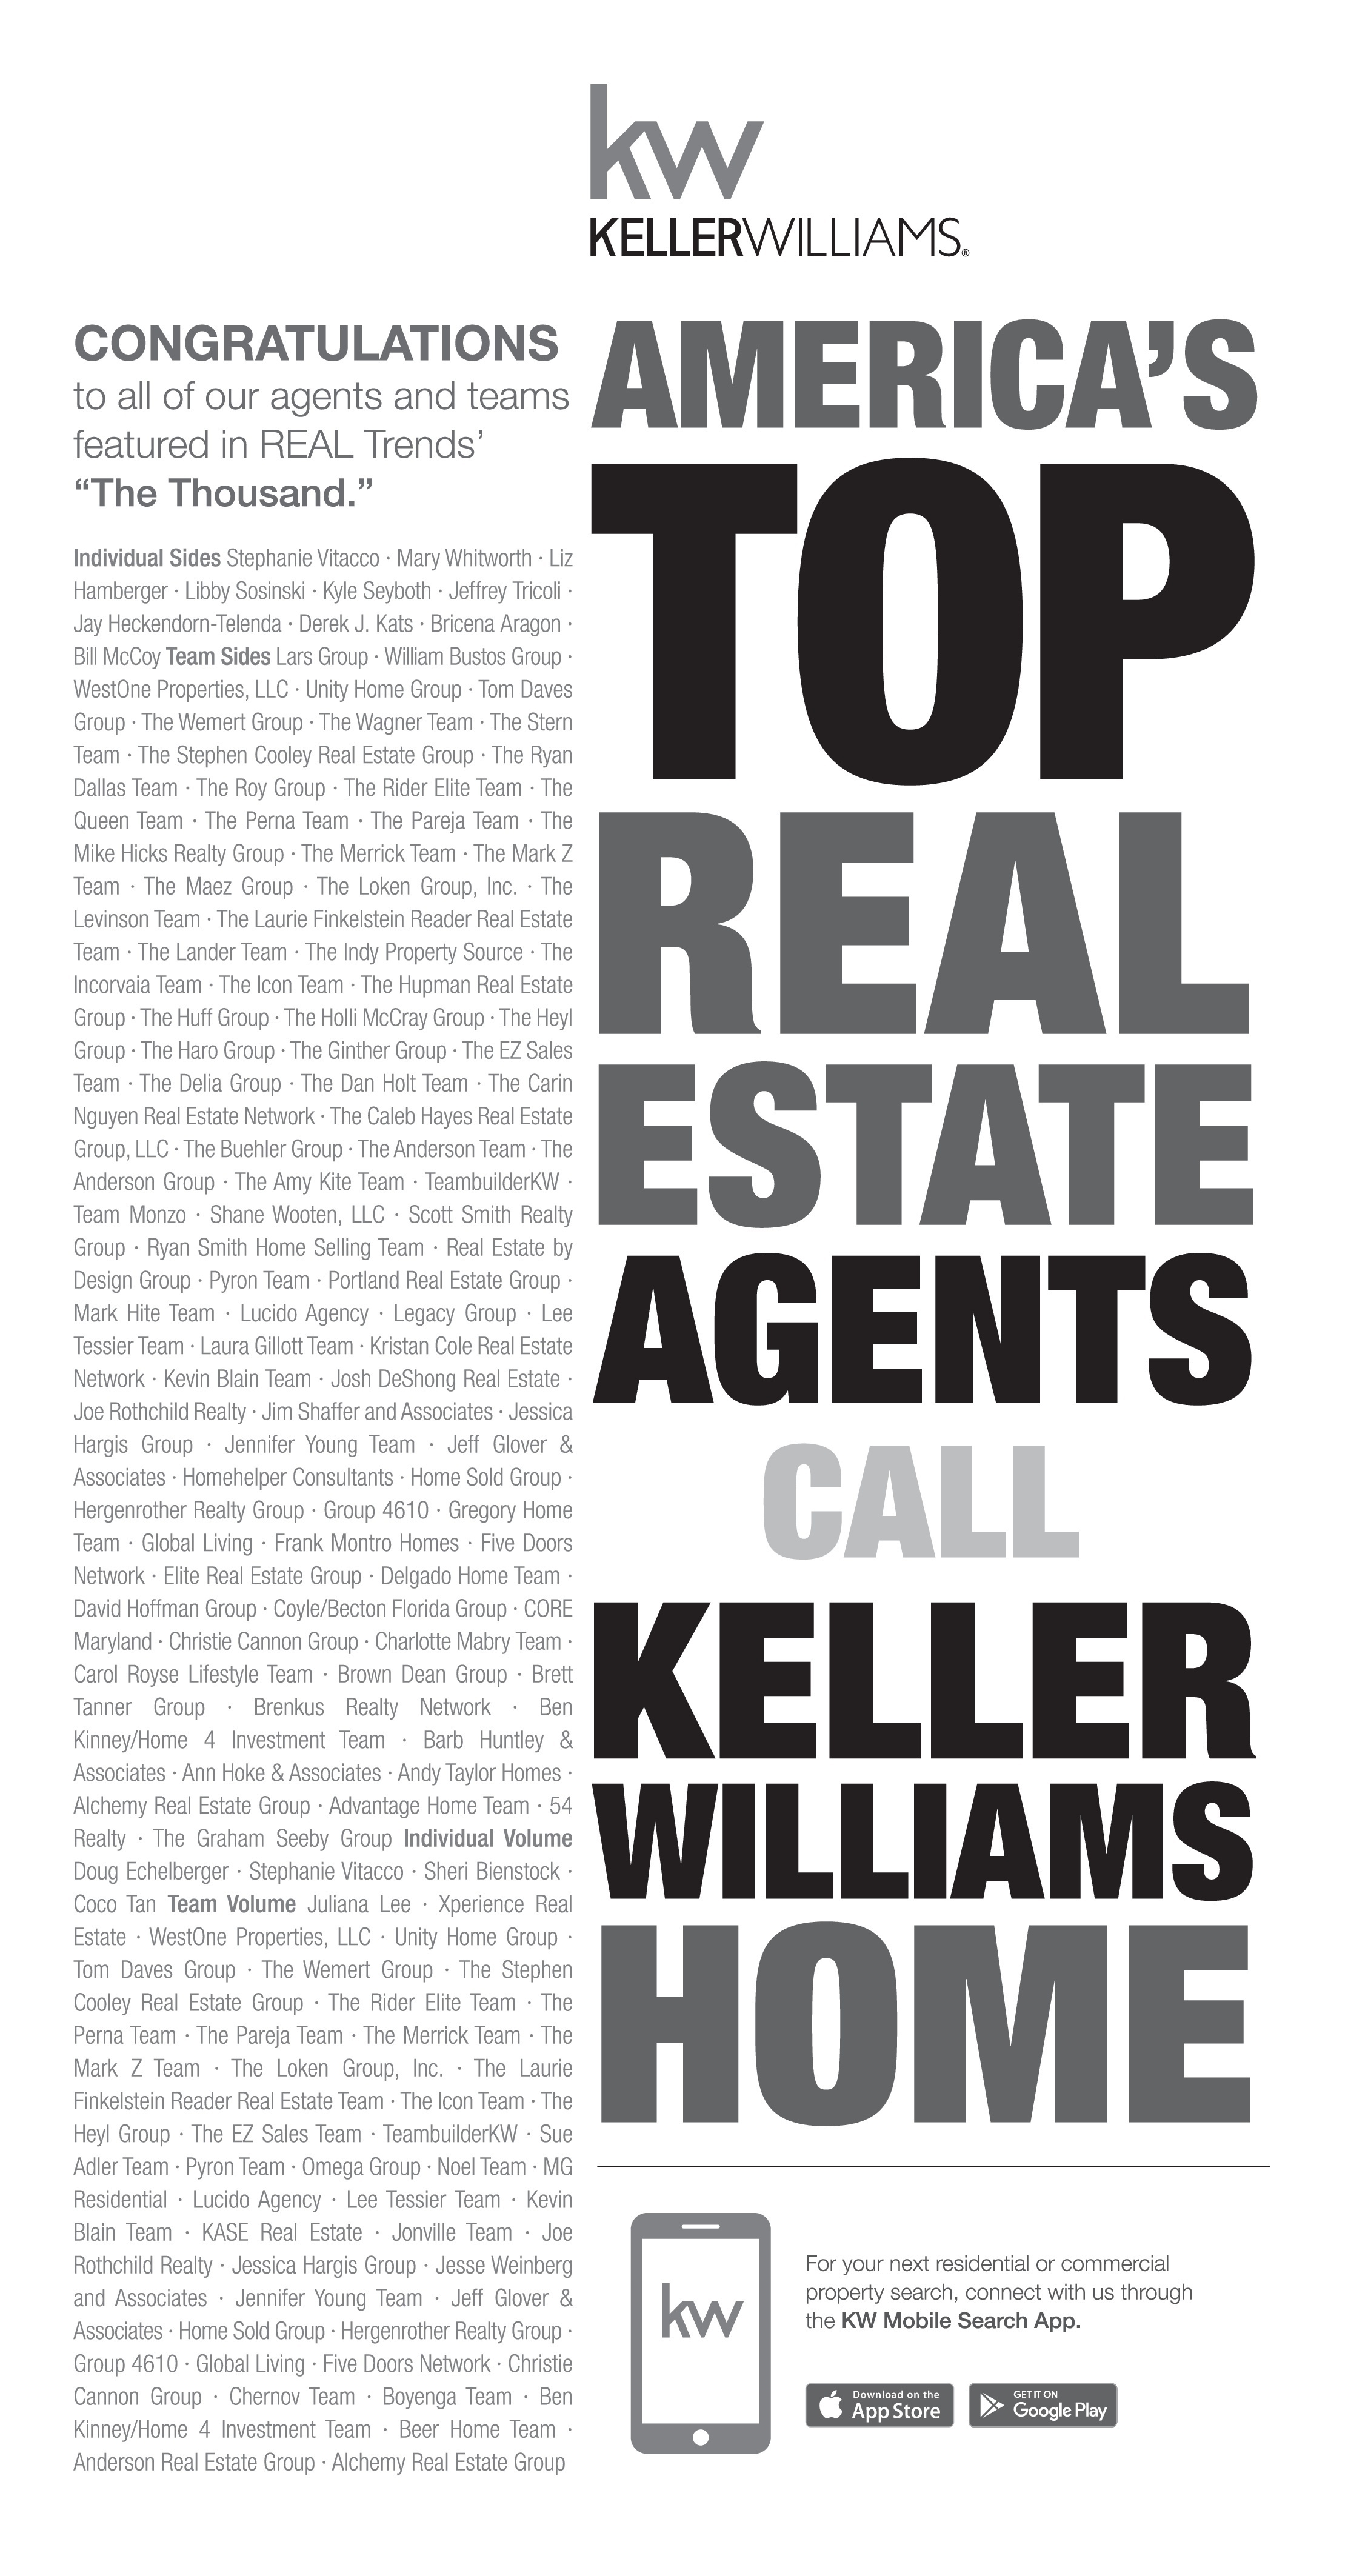 America's Top Real Estate Agents Call Keller Williams Home!